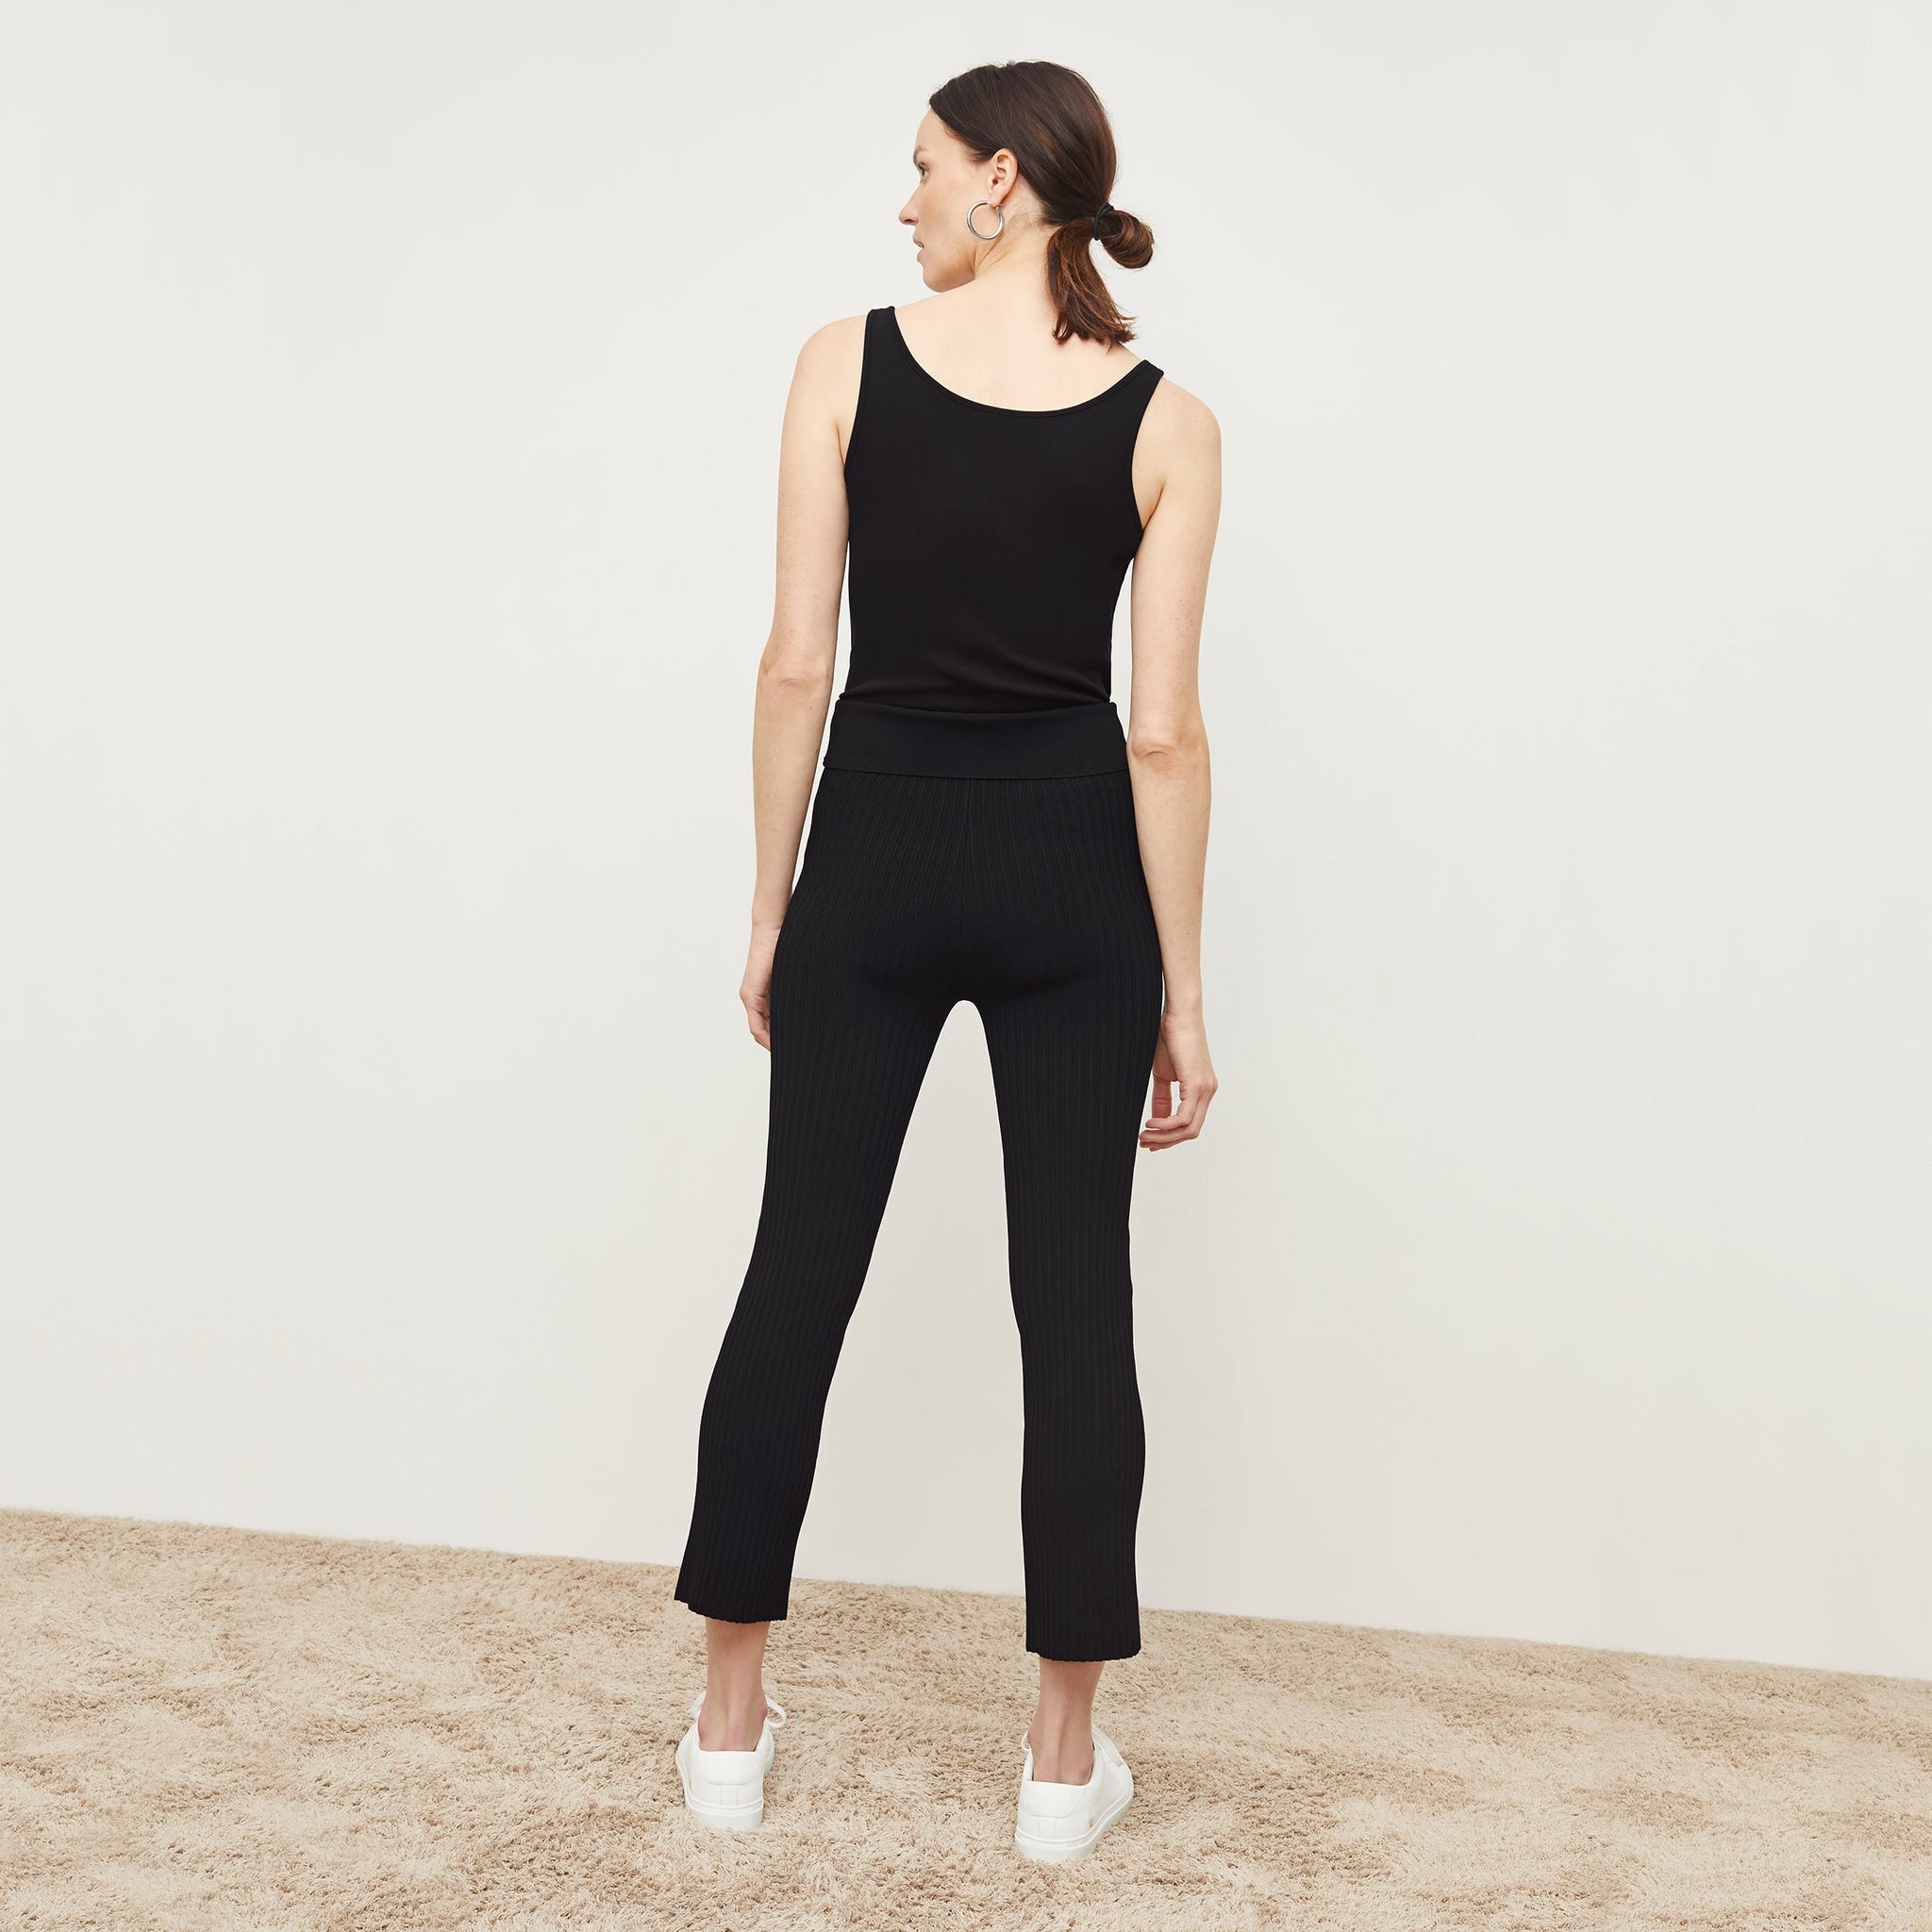 Back image of a woman standing wearing the Finley Legging—Ribbed Jardigan Knit in Black